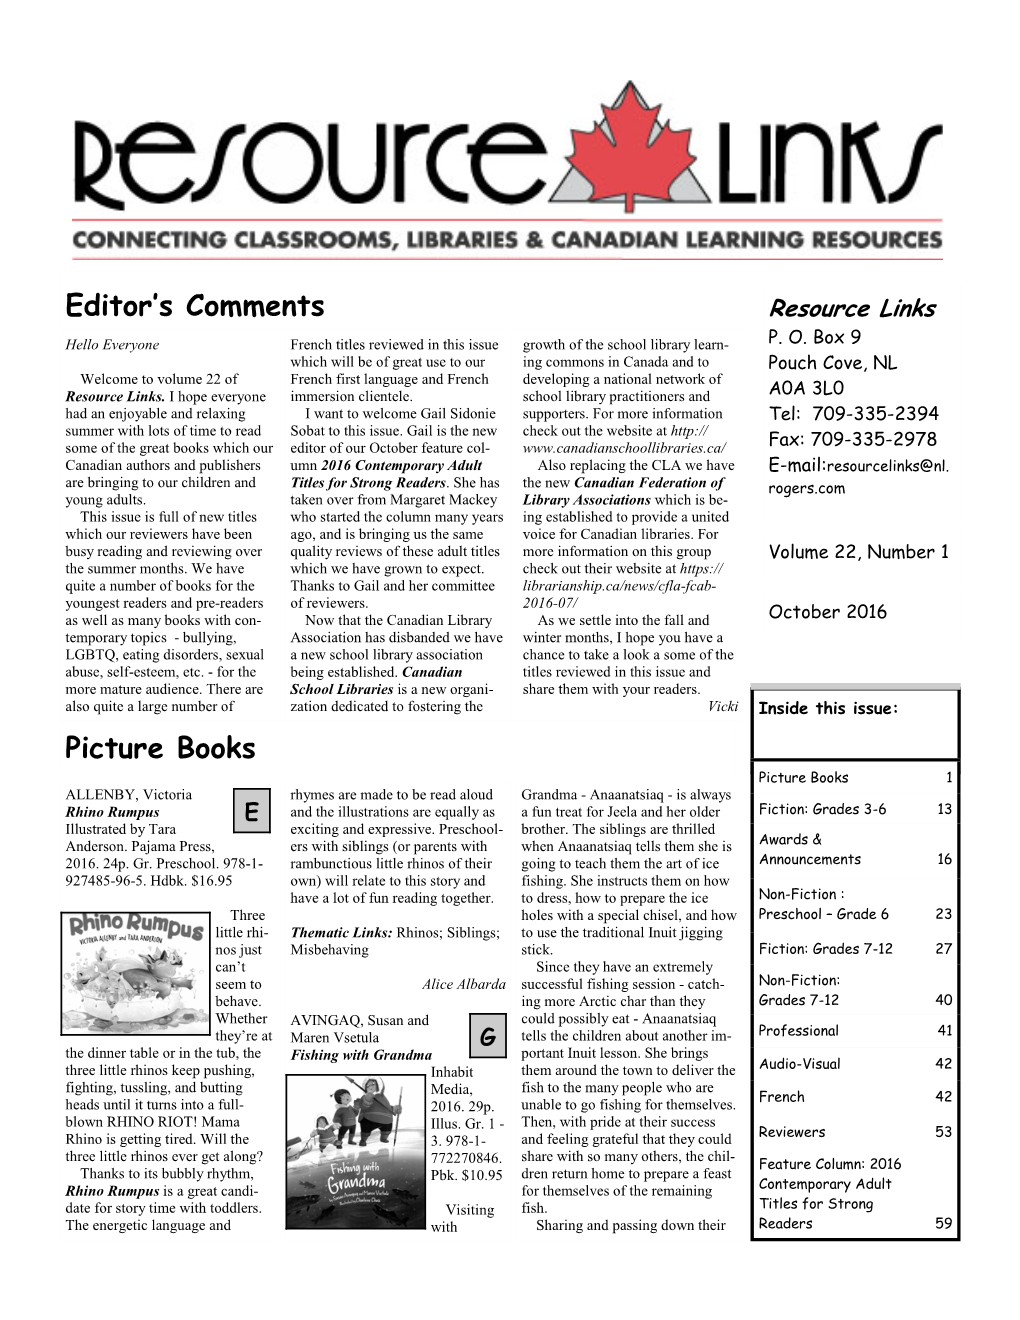 Resource Links Hello Everyone French Titles Reviewed in This Issue Growth of the School Library Learn- P